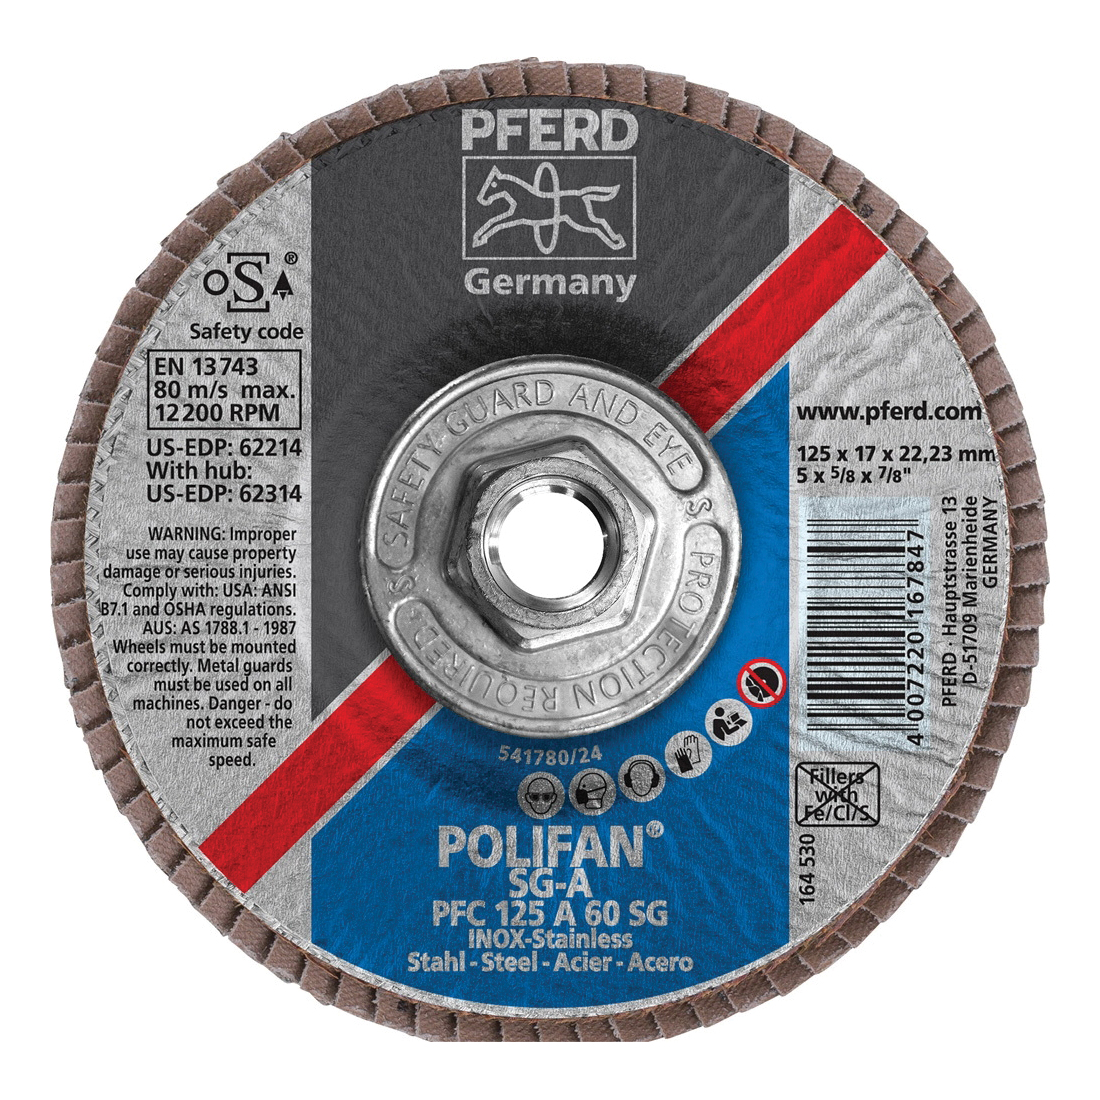 PFERD Polifan® 62314 Performance Line SG A Threaded Coated Abrasive Flap Disc, 5 in Dia, 60 Grit, Aluminum Oxide Abrasive, Type 29 Conical Disc